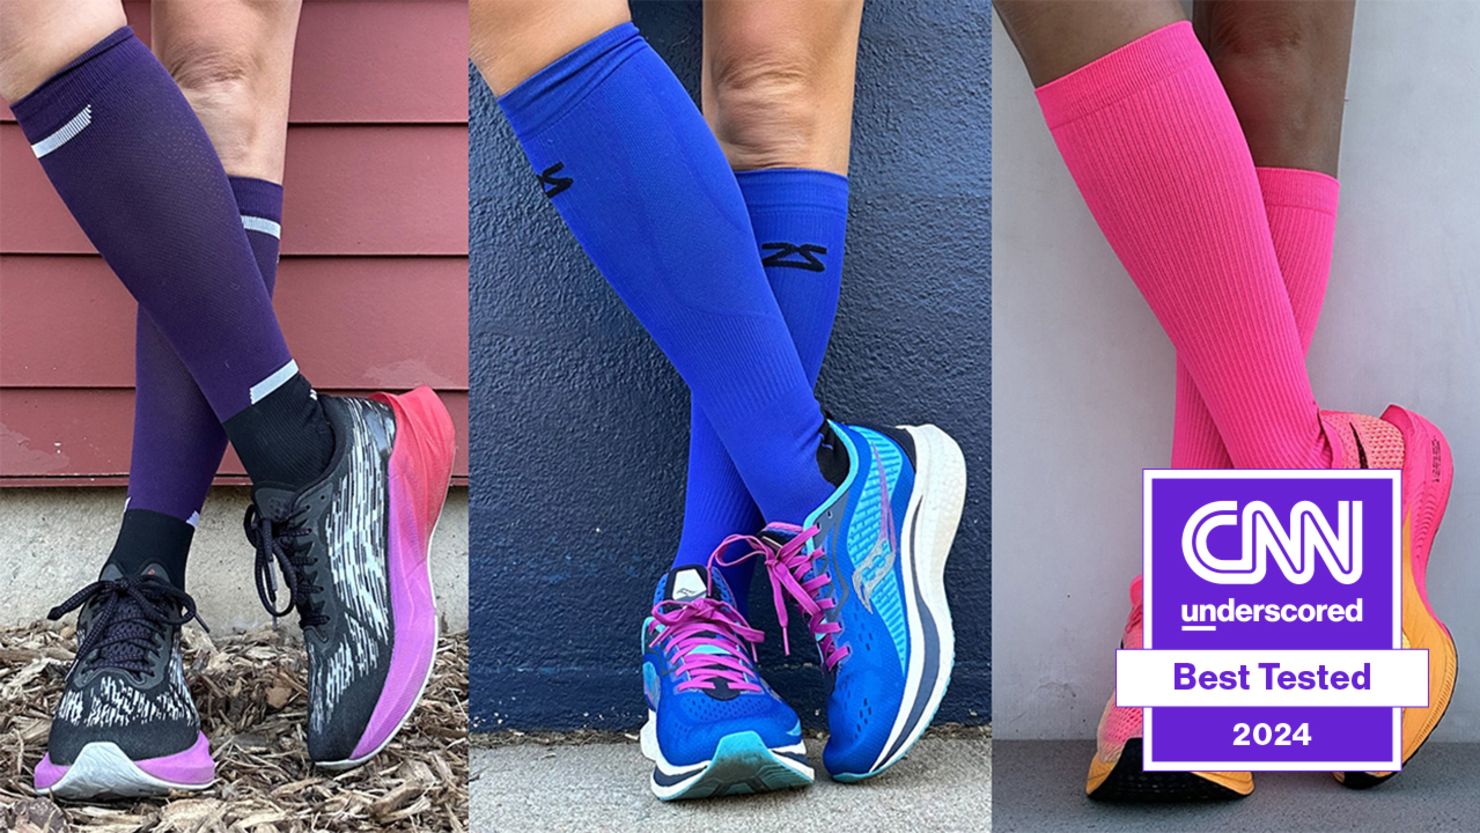 Finding and Choosing the Right Compression Sock